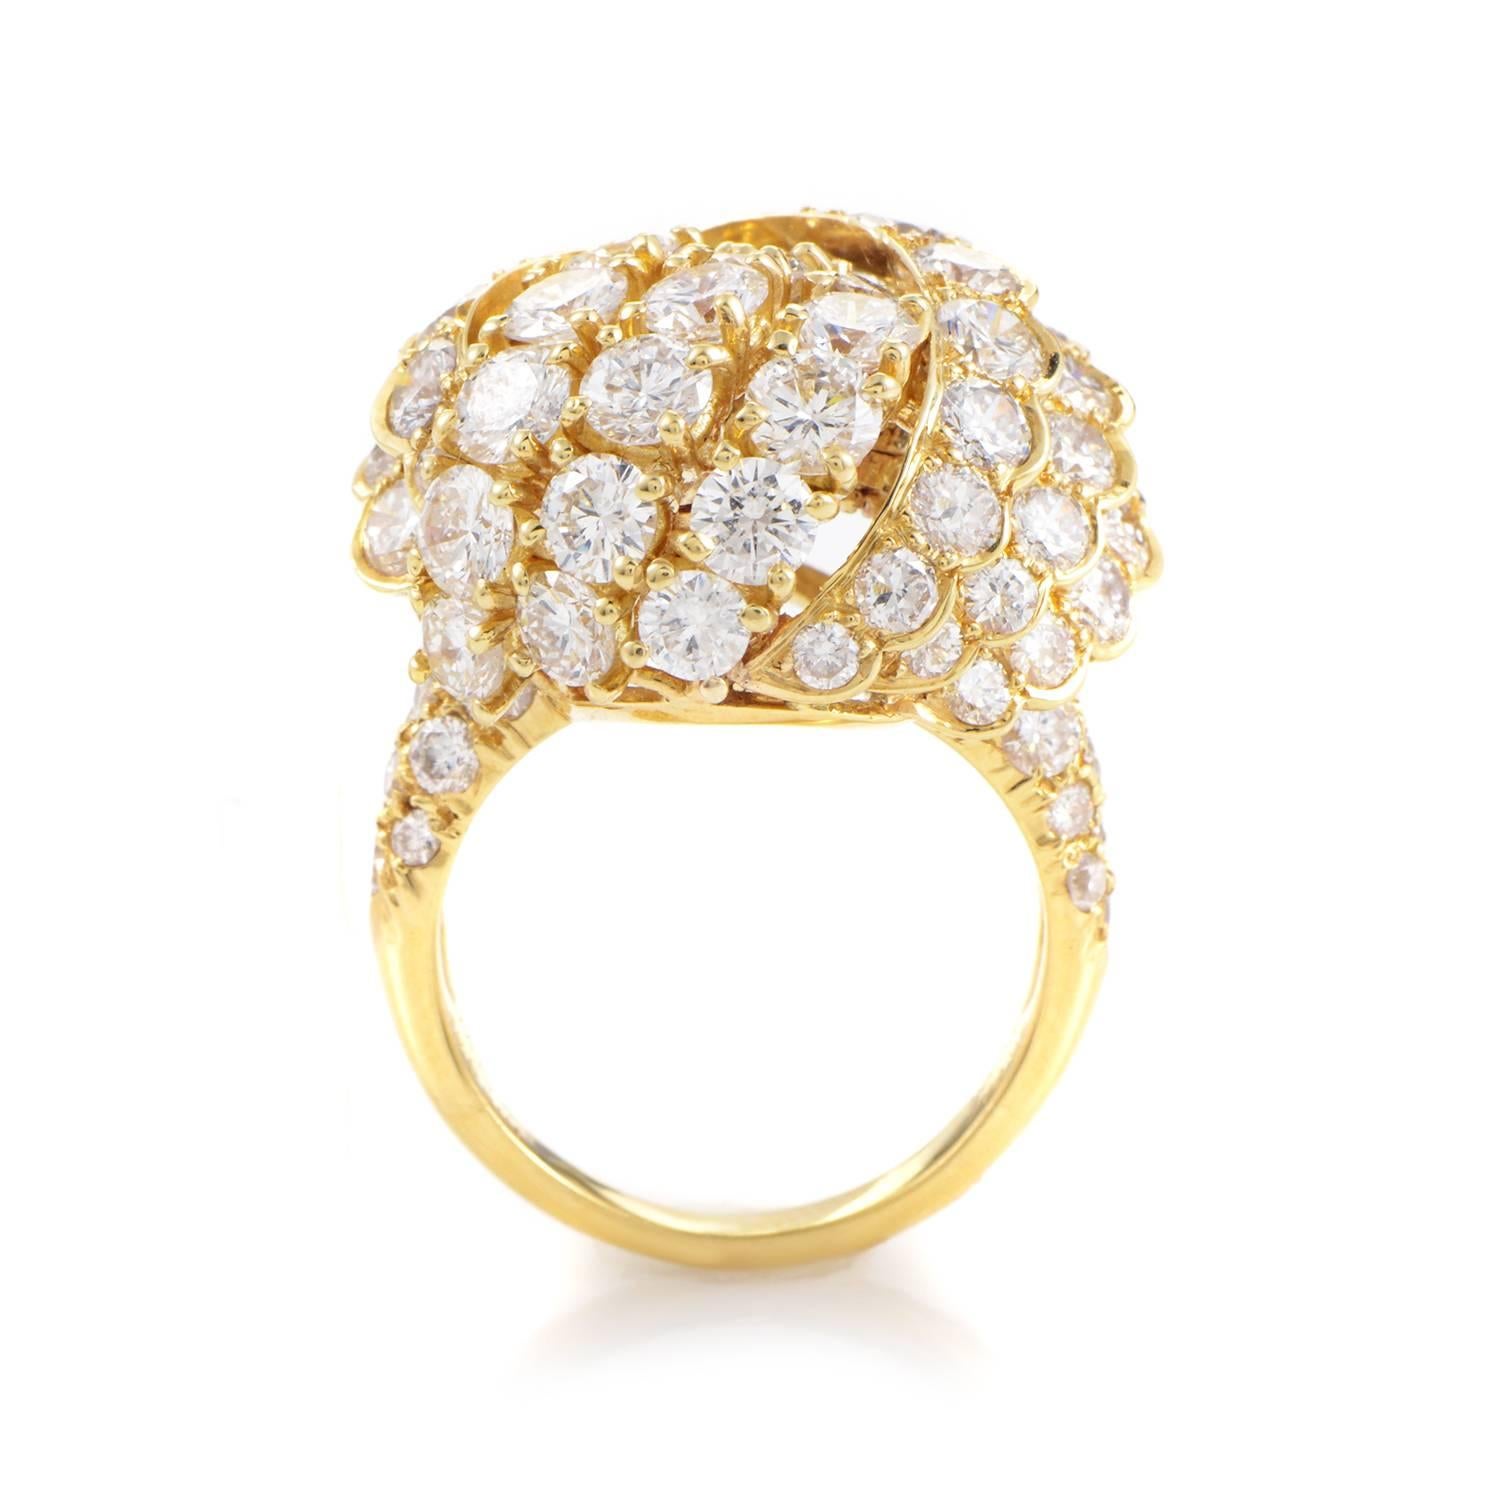 Magnificently designed and lavishly paved with glittering diamonds weighing in total approximately 6.00 carats, the 18K yellow gold body of this remarkable ring from Van Cleef & Arpels combines its bright radiance with an imaginative